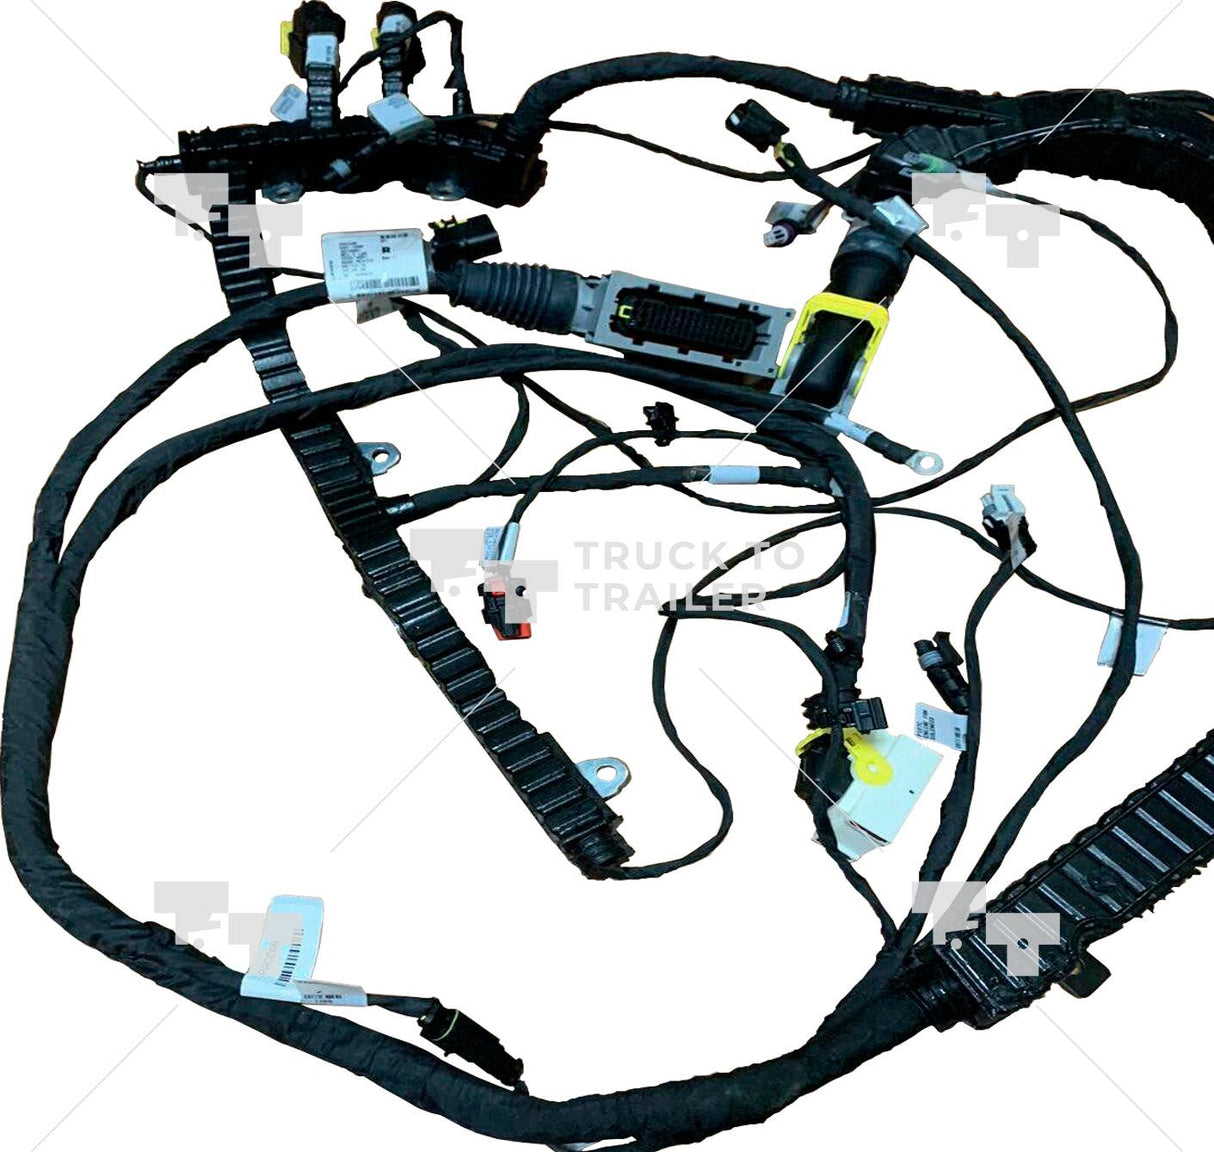 D92-1088-8333331 D92-1088-2010001 Genuine Paccar® Engine Harness.